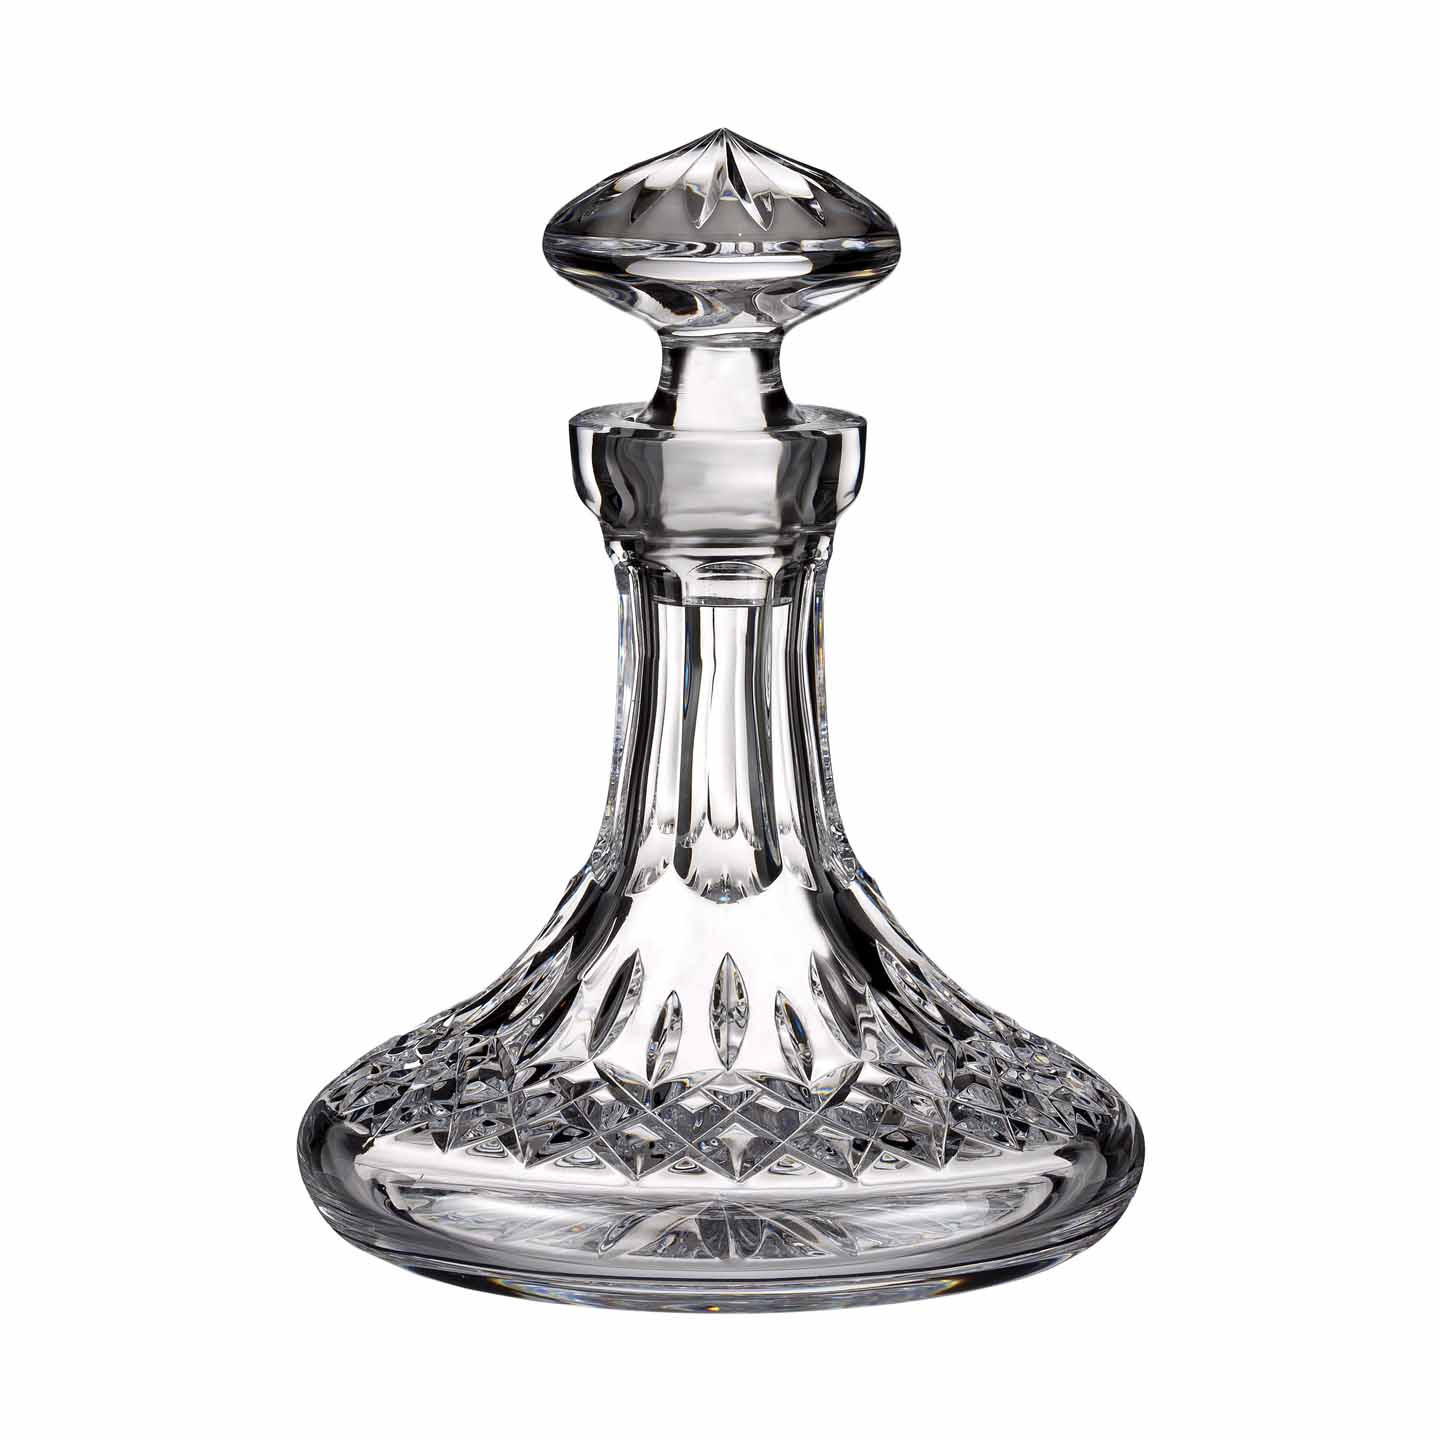 11 Lovable Marquis by Waterford Sheridan Flared 11 Crystal Vase 2024 free download marquis by waterford sheridan flared 11 crystal vase of lismore connoisseur mini ships decanter waterforda crystal pertaining to waterford lismore connoisseur mini ships decanter 70158715492